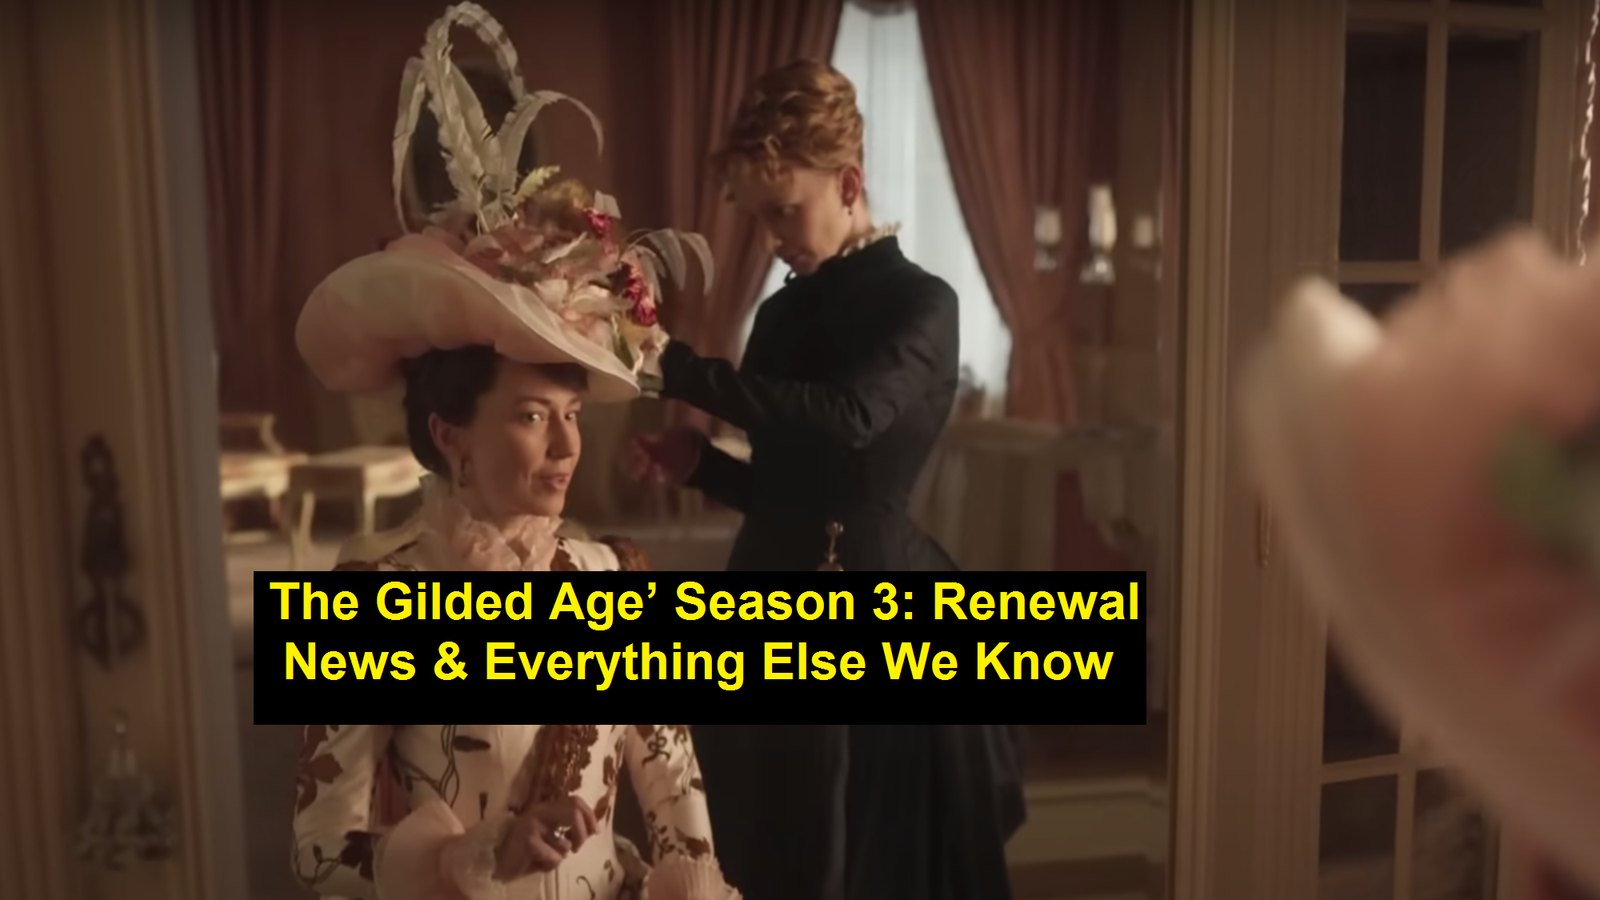 ‘The Gilded Age’ Season 3: Renewal News & Everything Else We Know